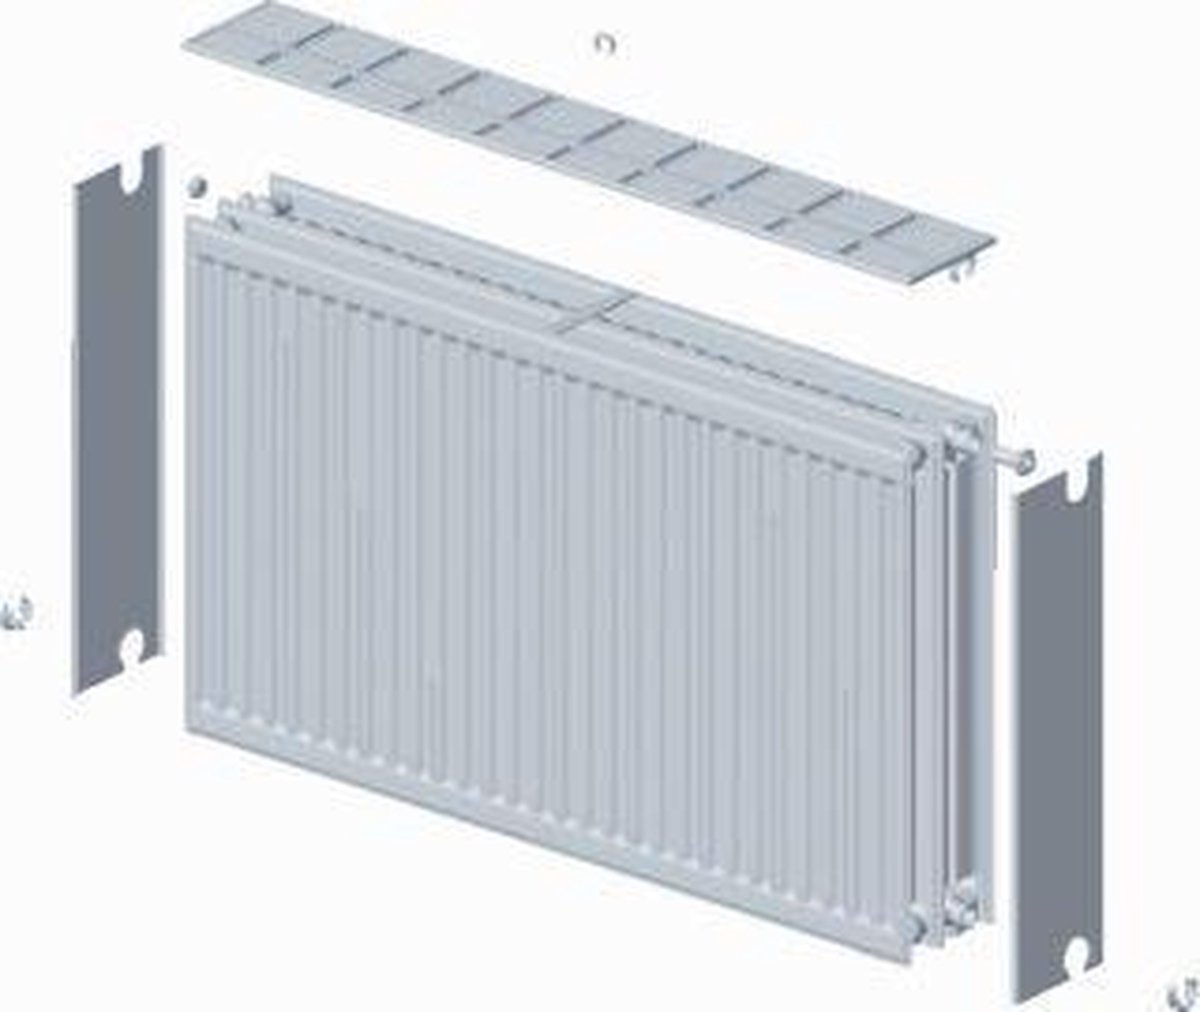 Stelrad paneelradiator Novello, staal, wit, (hxlxd) 400x800x158mm, 33